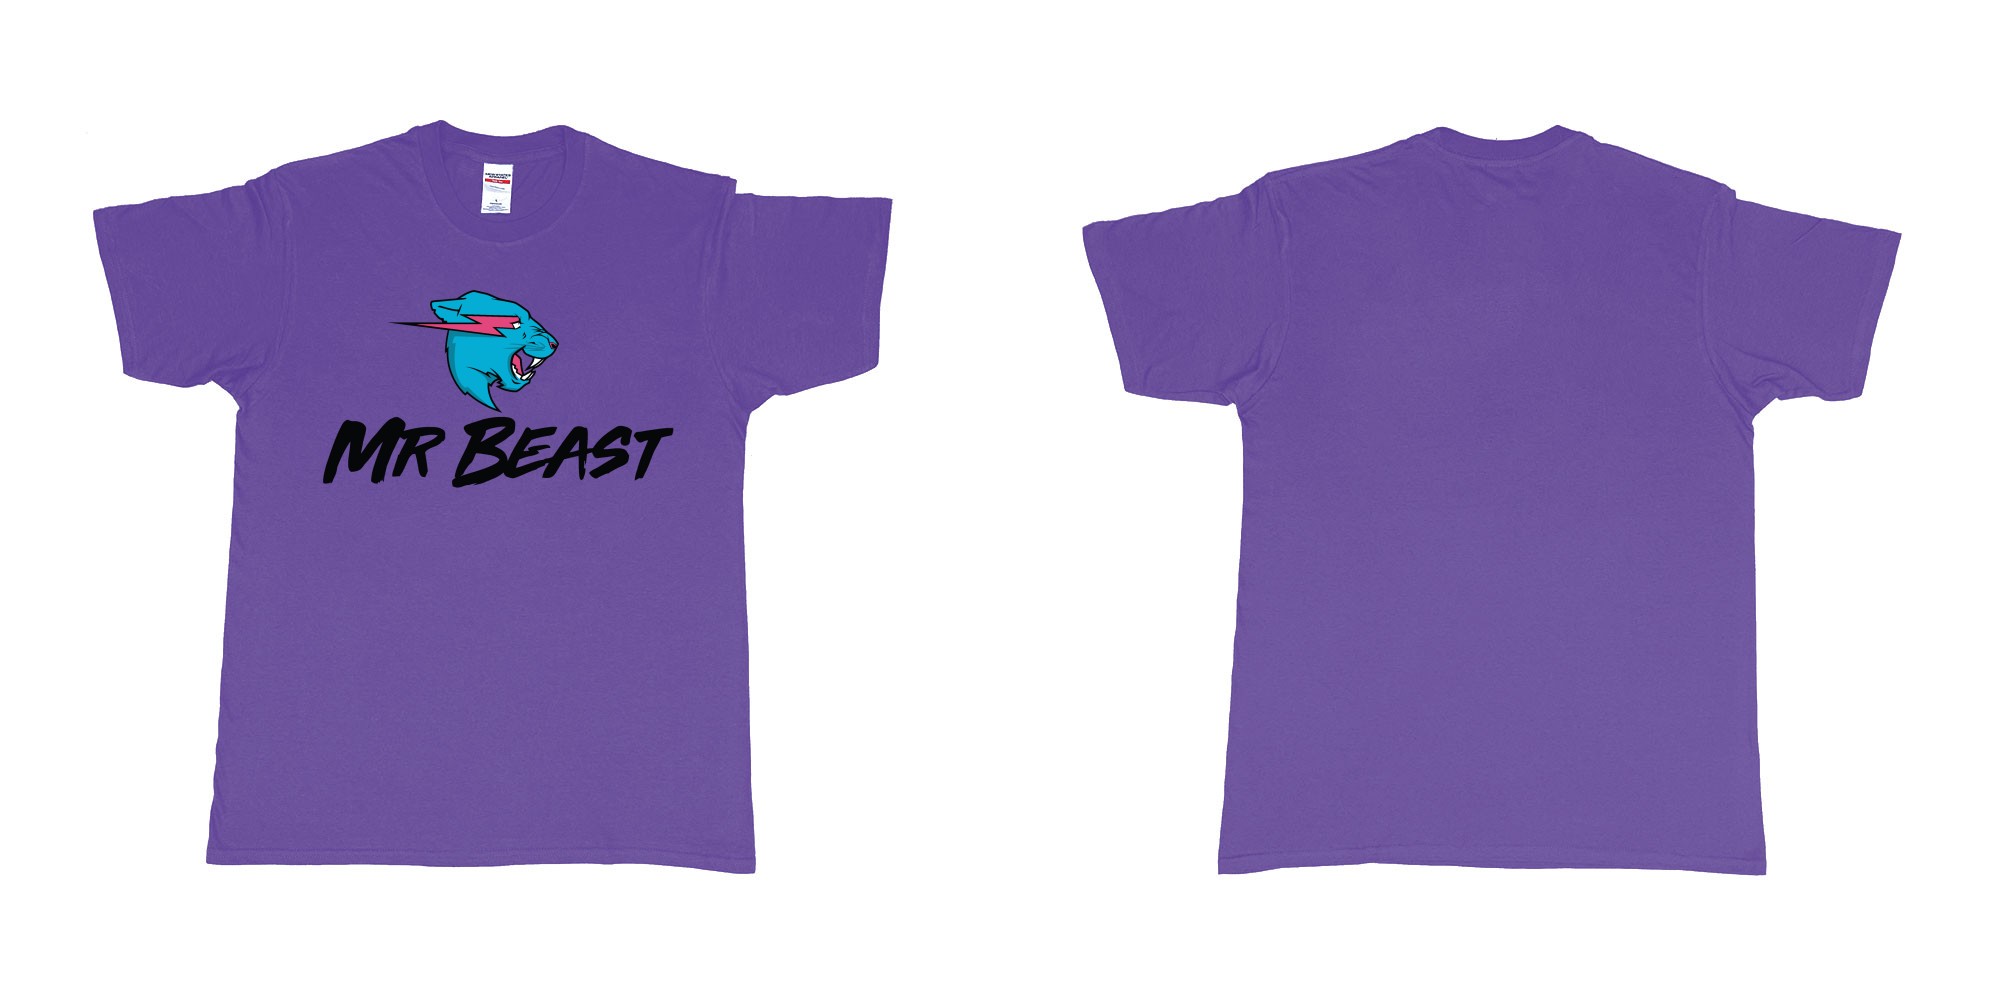 Custom tshirt design mr beast logo in fabric color purple choice your own text made in Bali by The Pirate Way